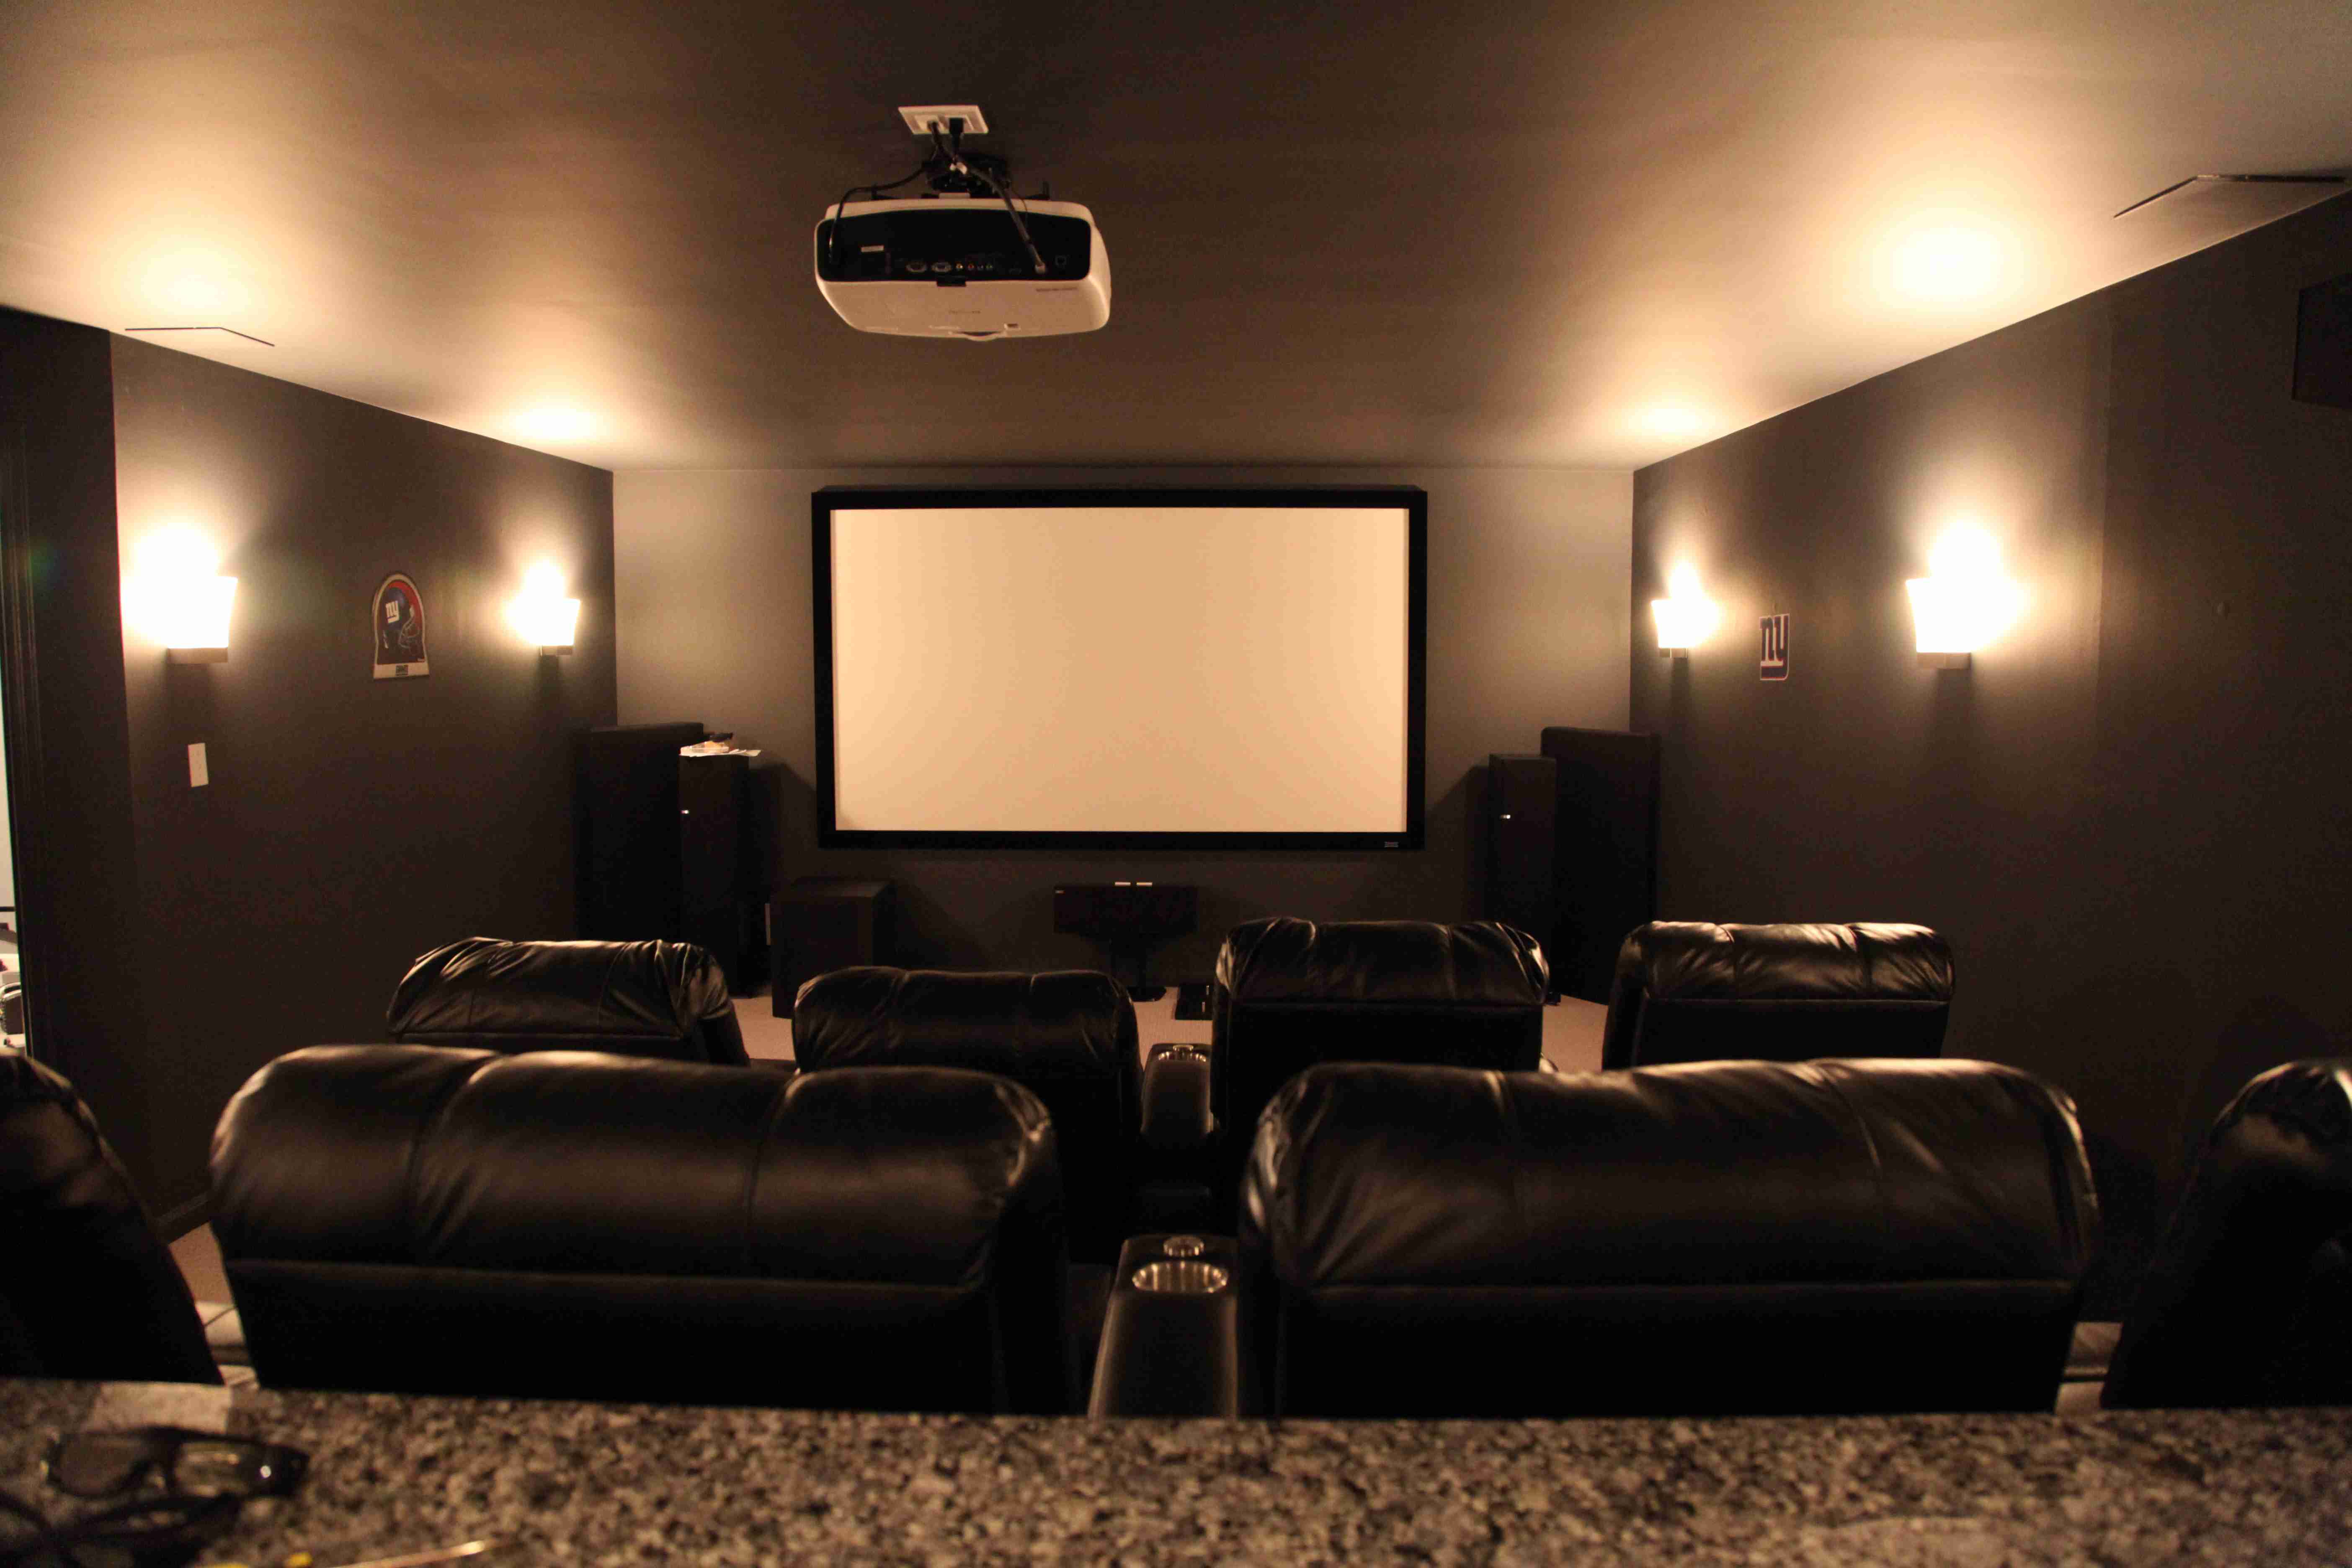 Best Color For Theater Room Walls: Dark And Rich Hues For Maximum Impact